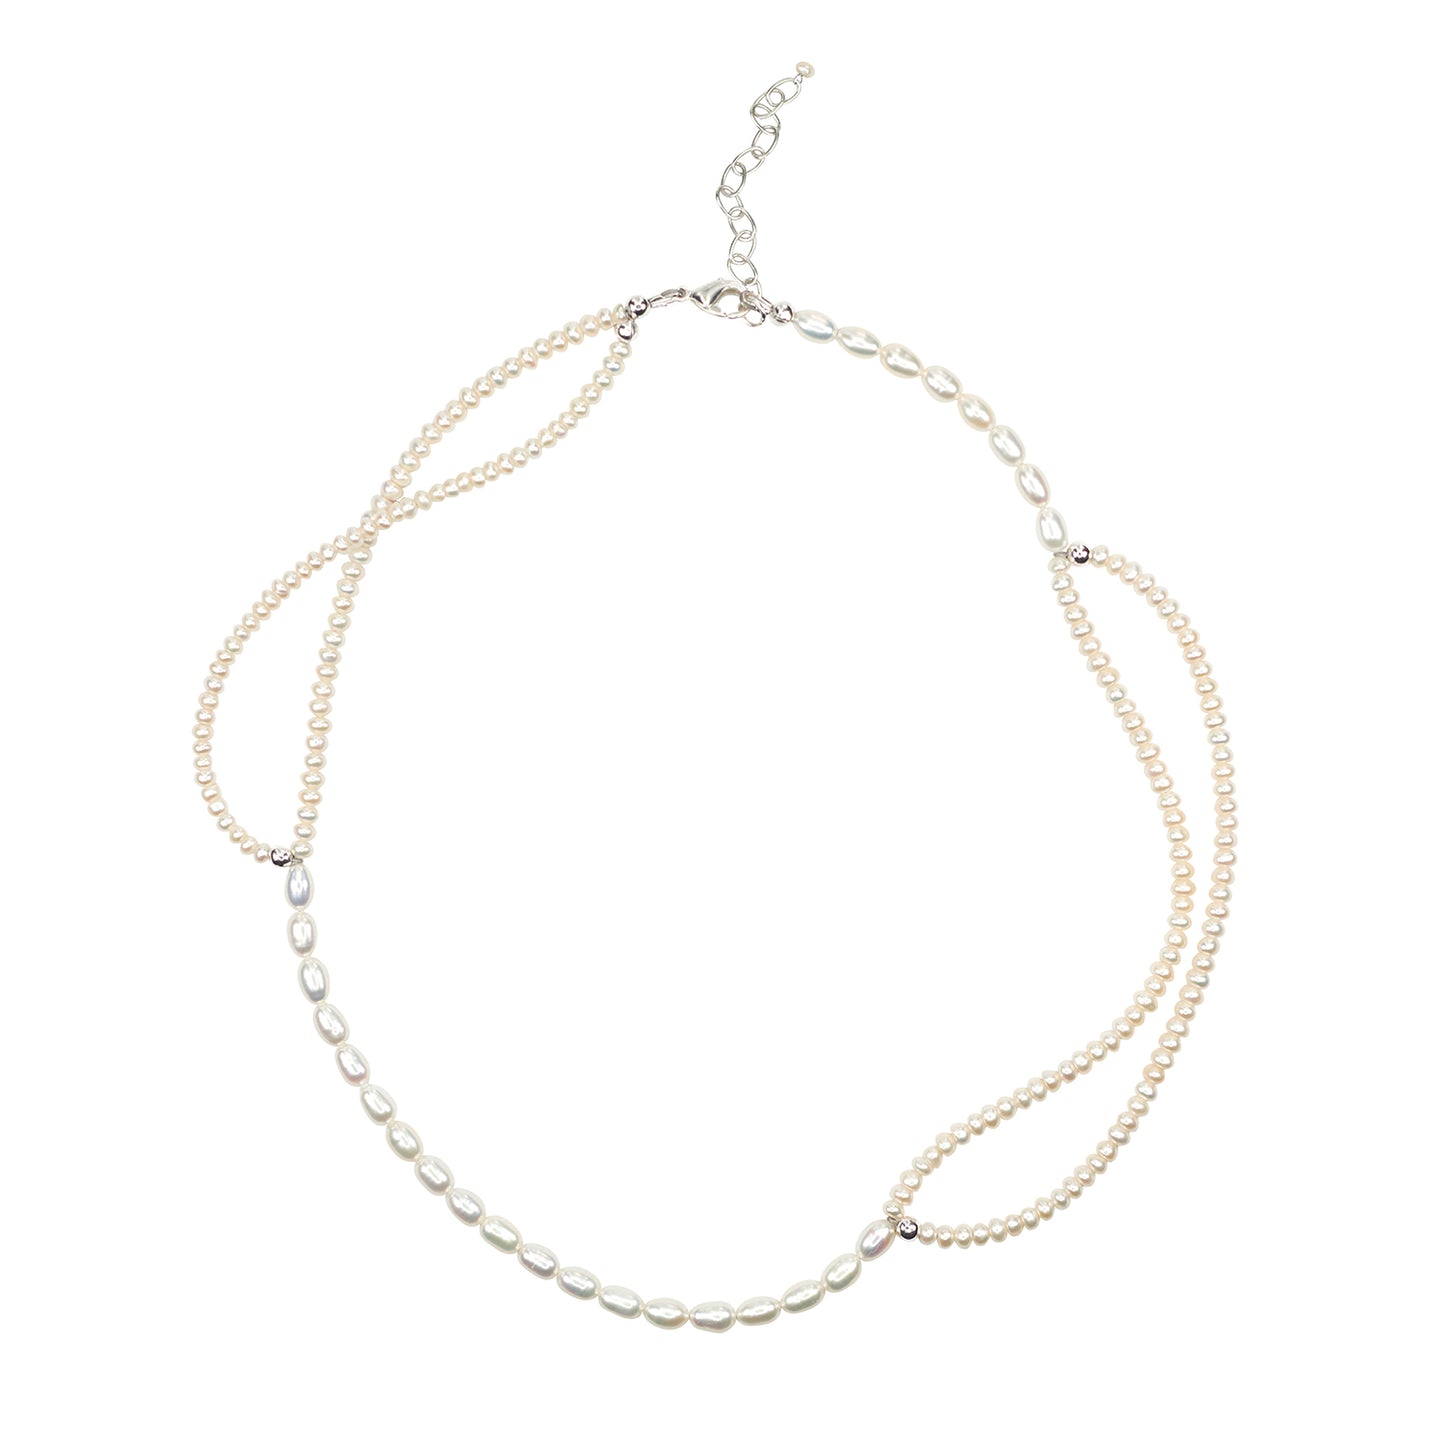 Infinity Freshwater Pearl Necklace